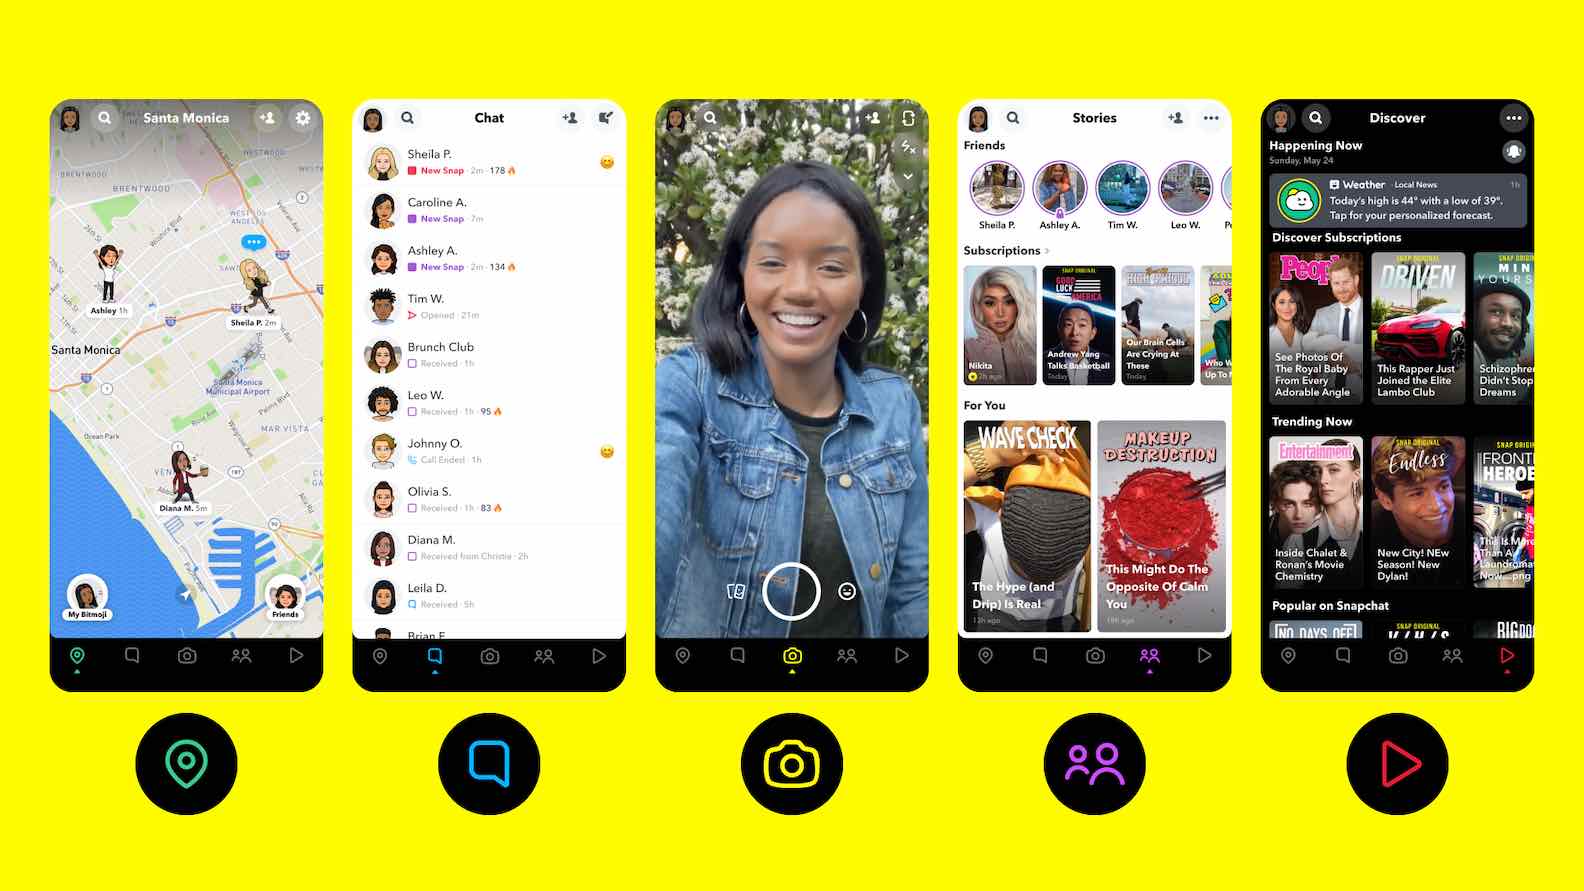 The app Snapchat is trying to hop into the streaming game with the recently announced Snapchat TV. Learn more about their strange programming here.